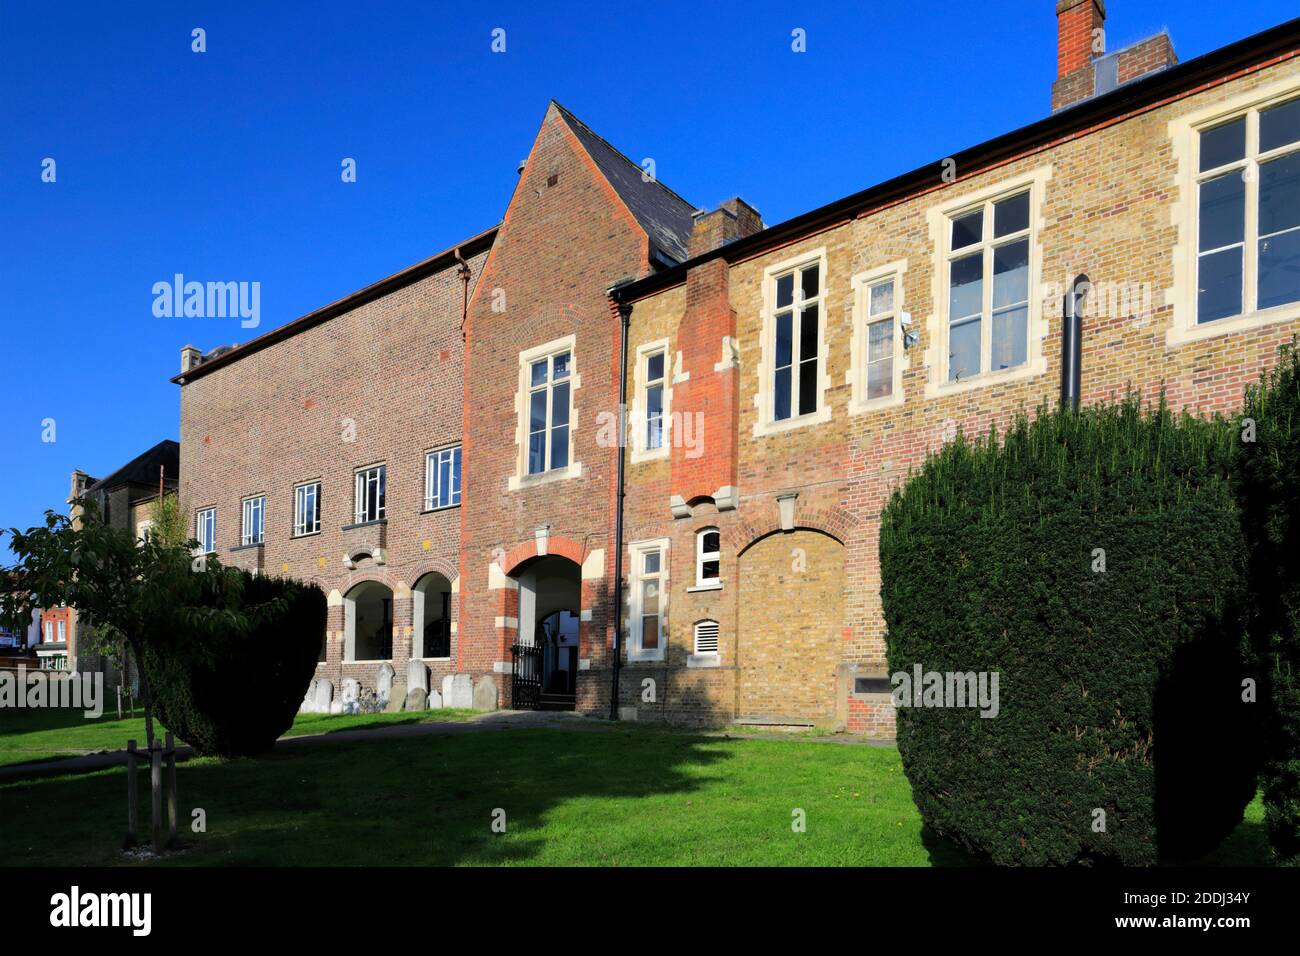 The Old Town Hall, Hemel Hempstead Old town, Hertfordshire County, England Stock Photo